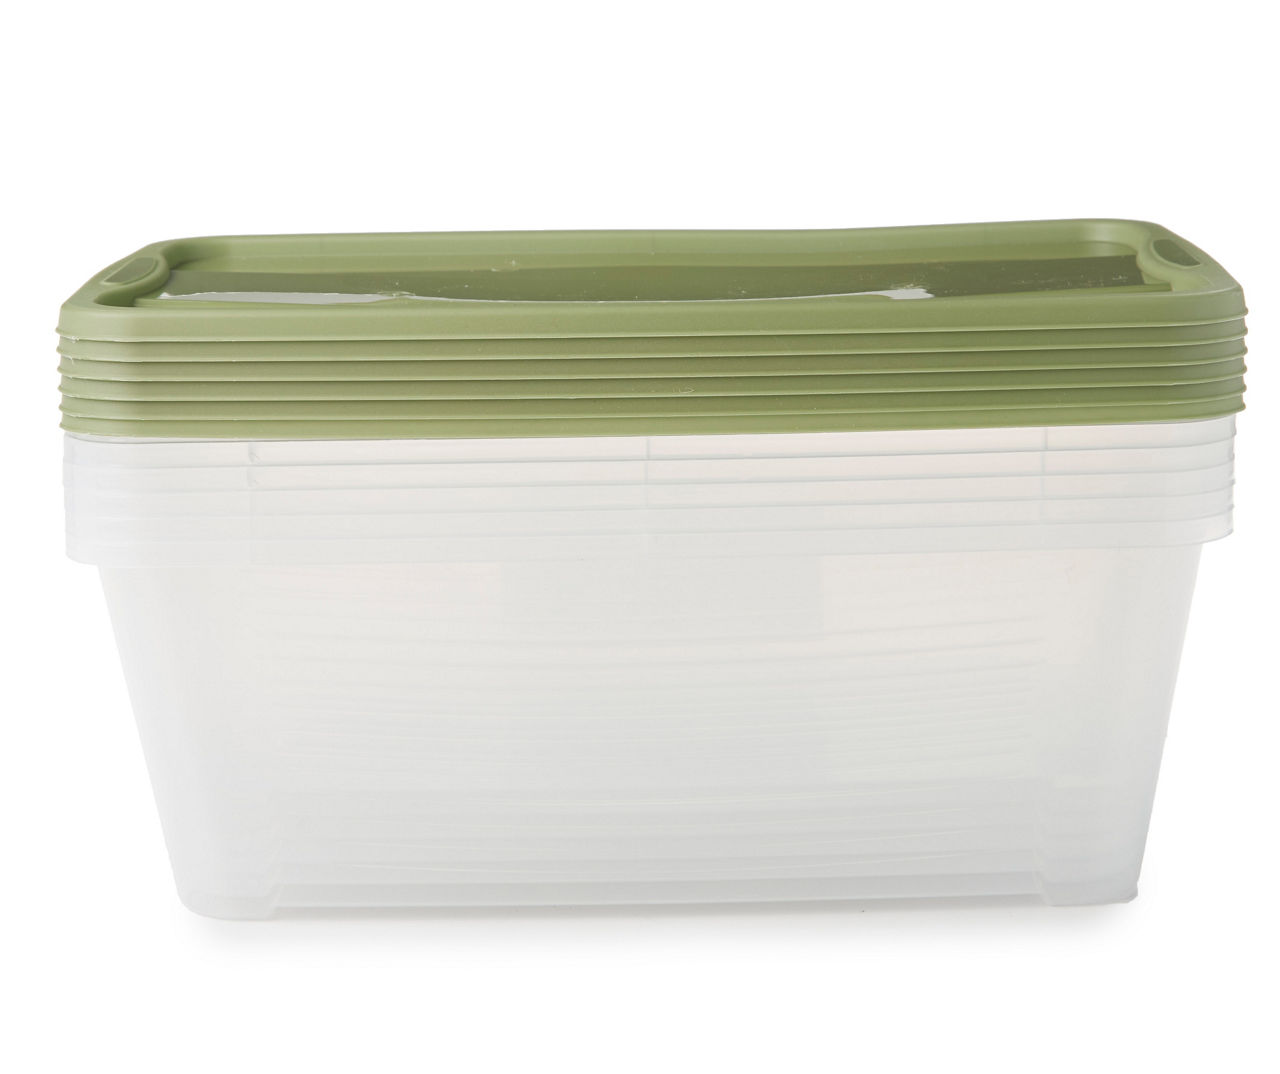 Life Story Clear 6-Quart Storage Box with Green Snap Lids, 6-Pack